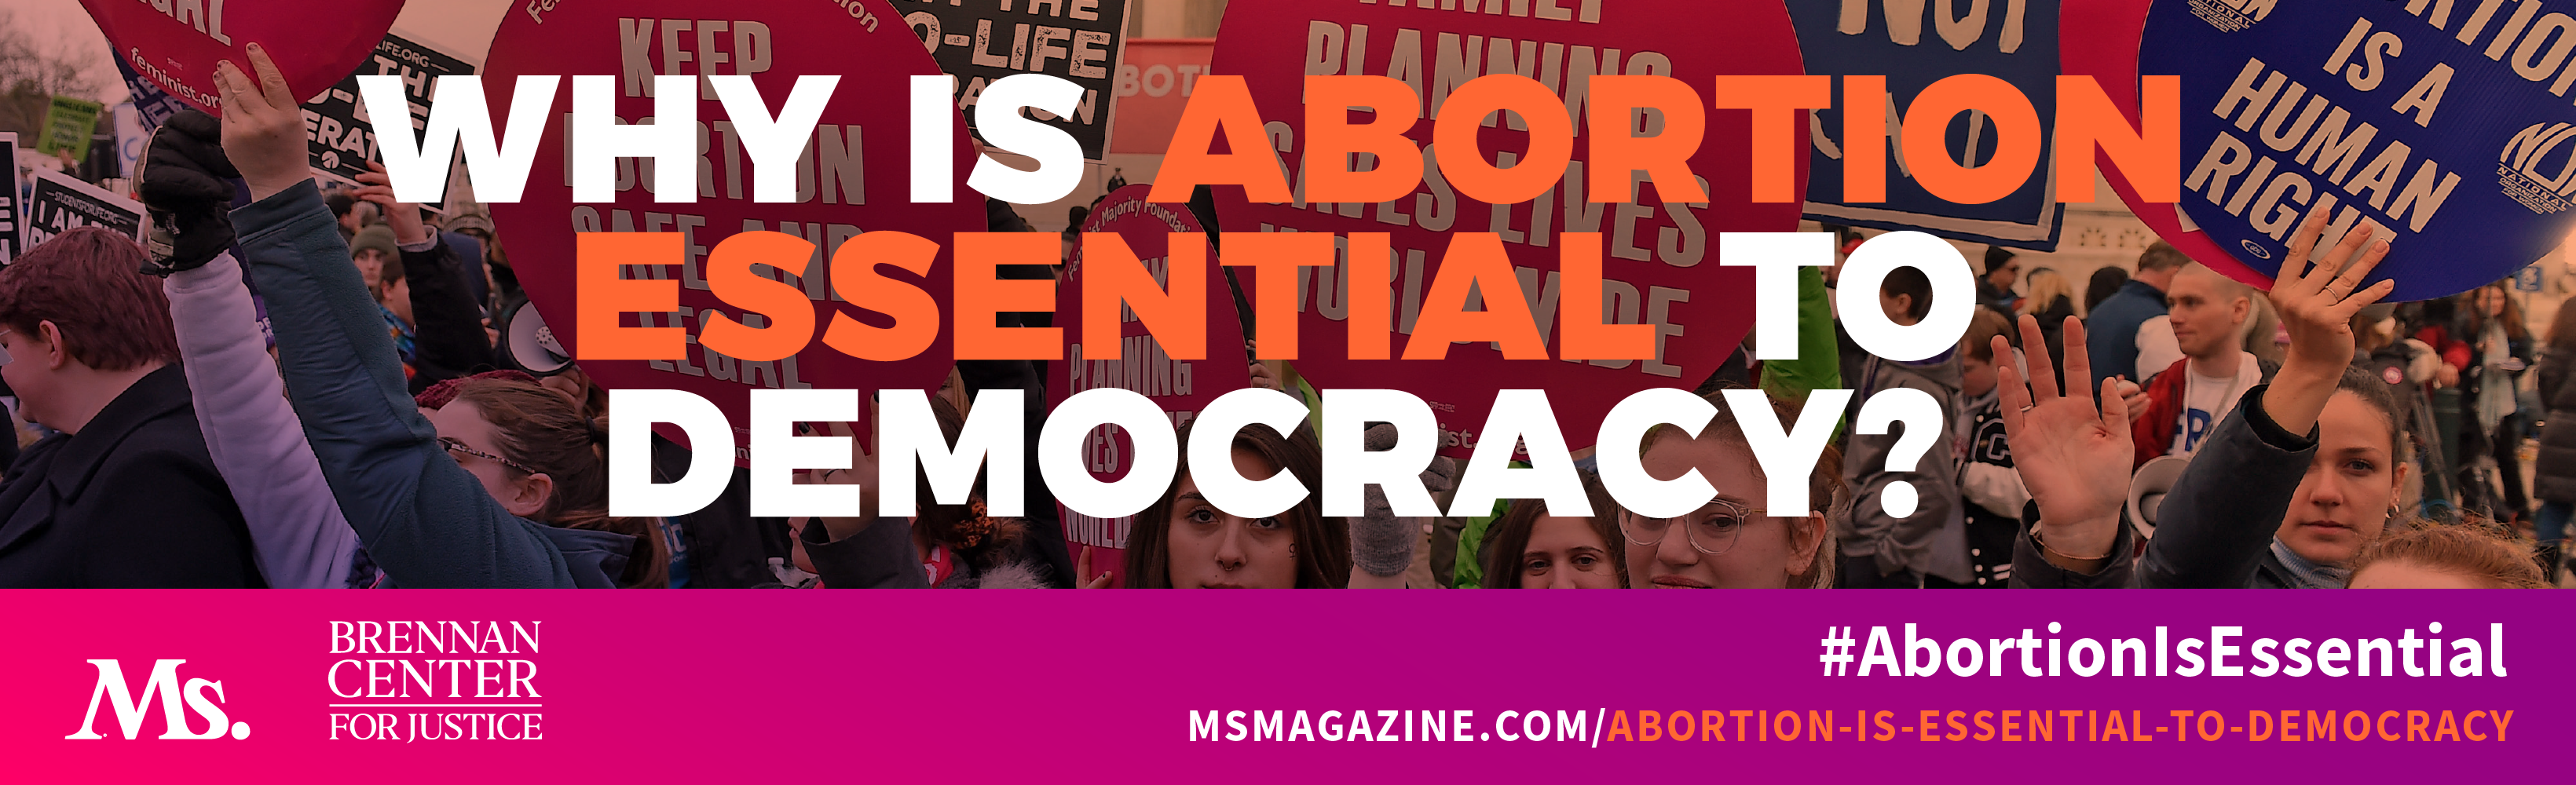 Why is Abortion Essential to Democracy?